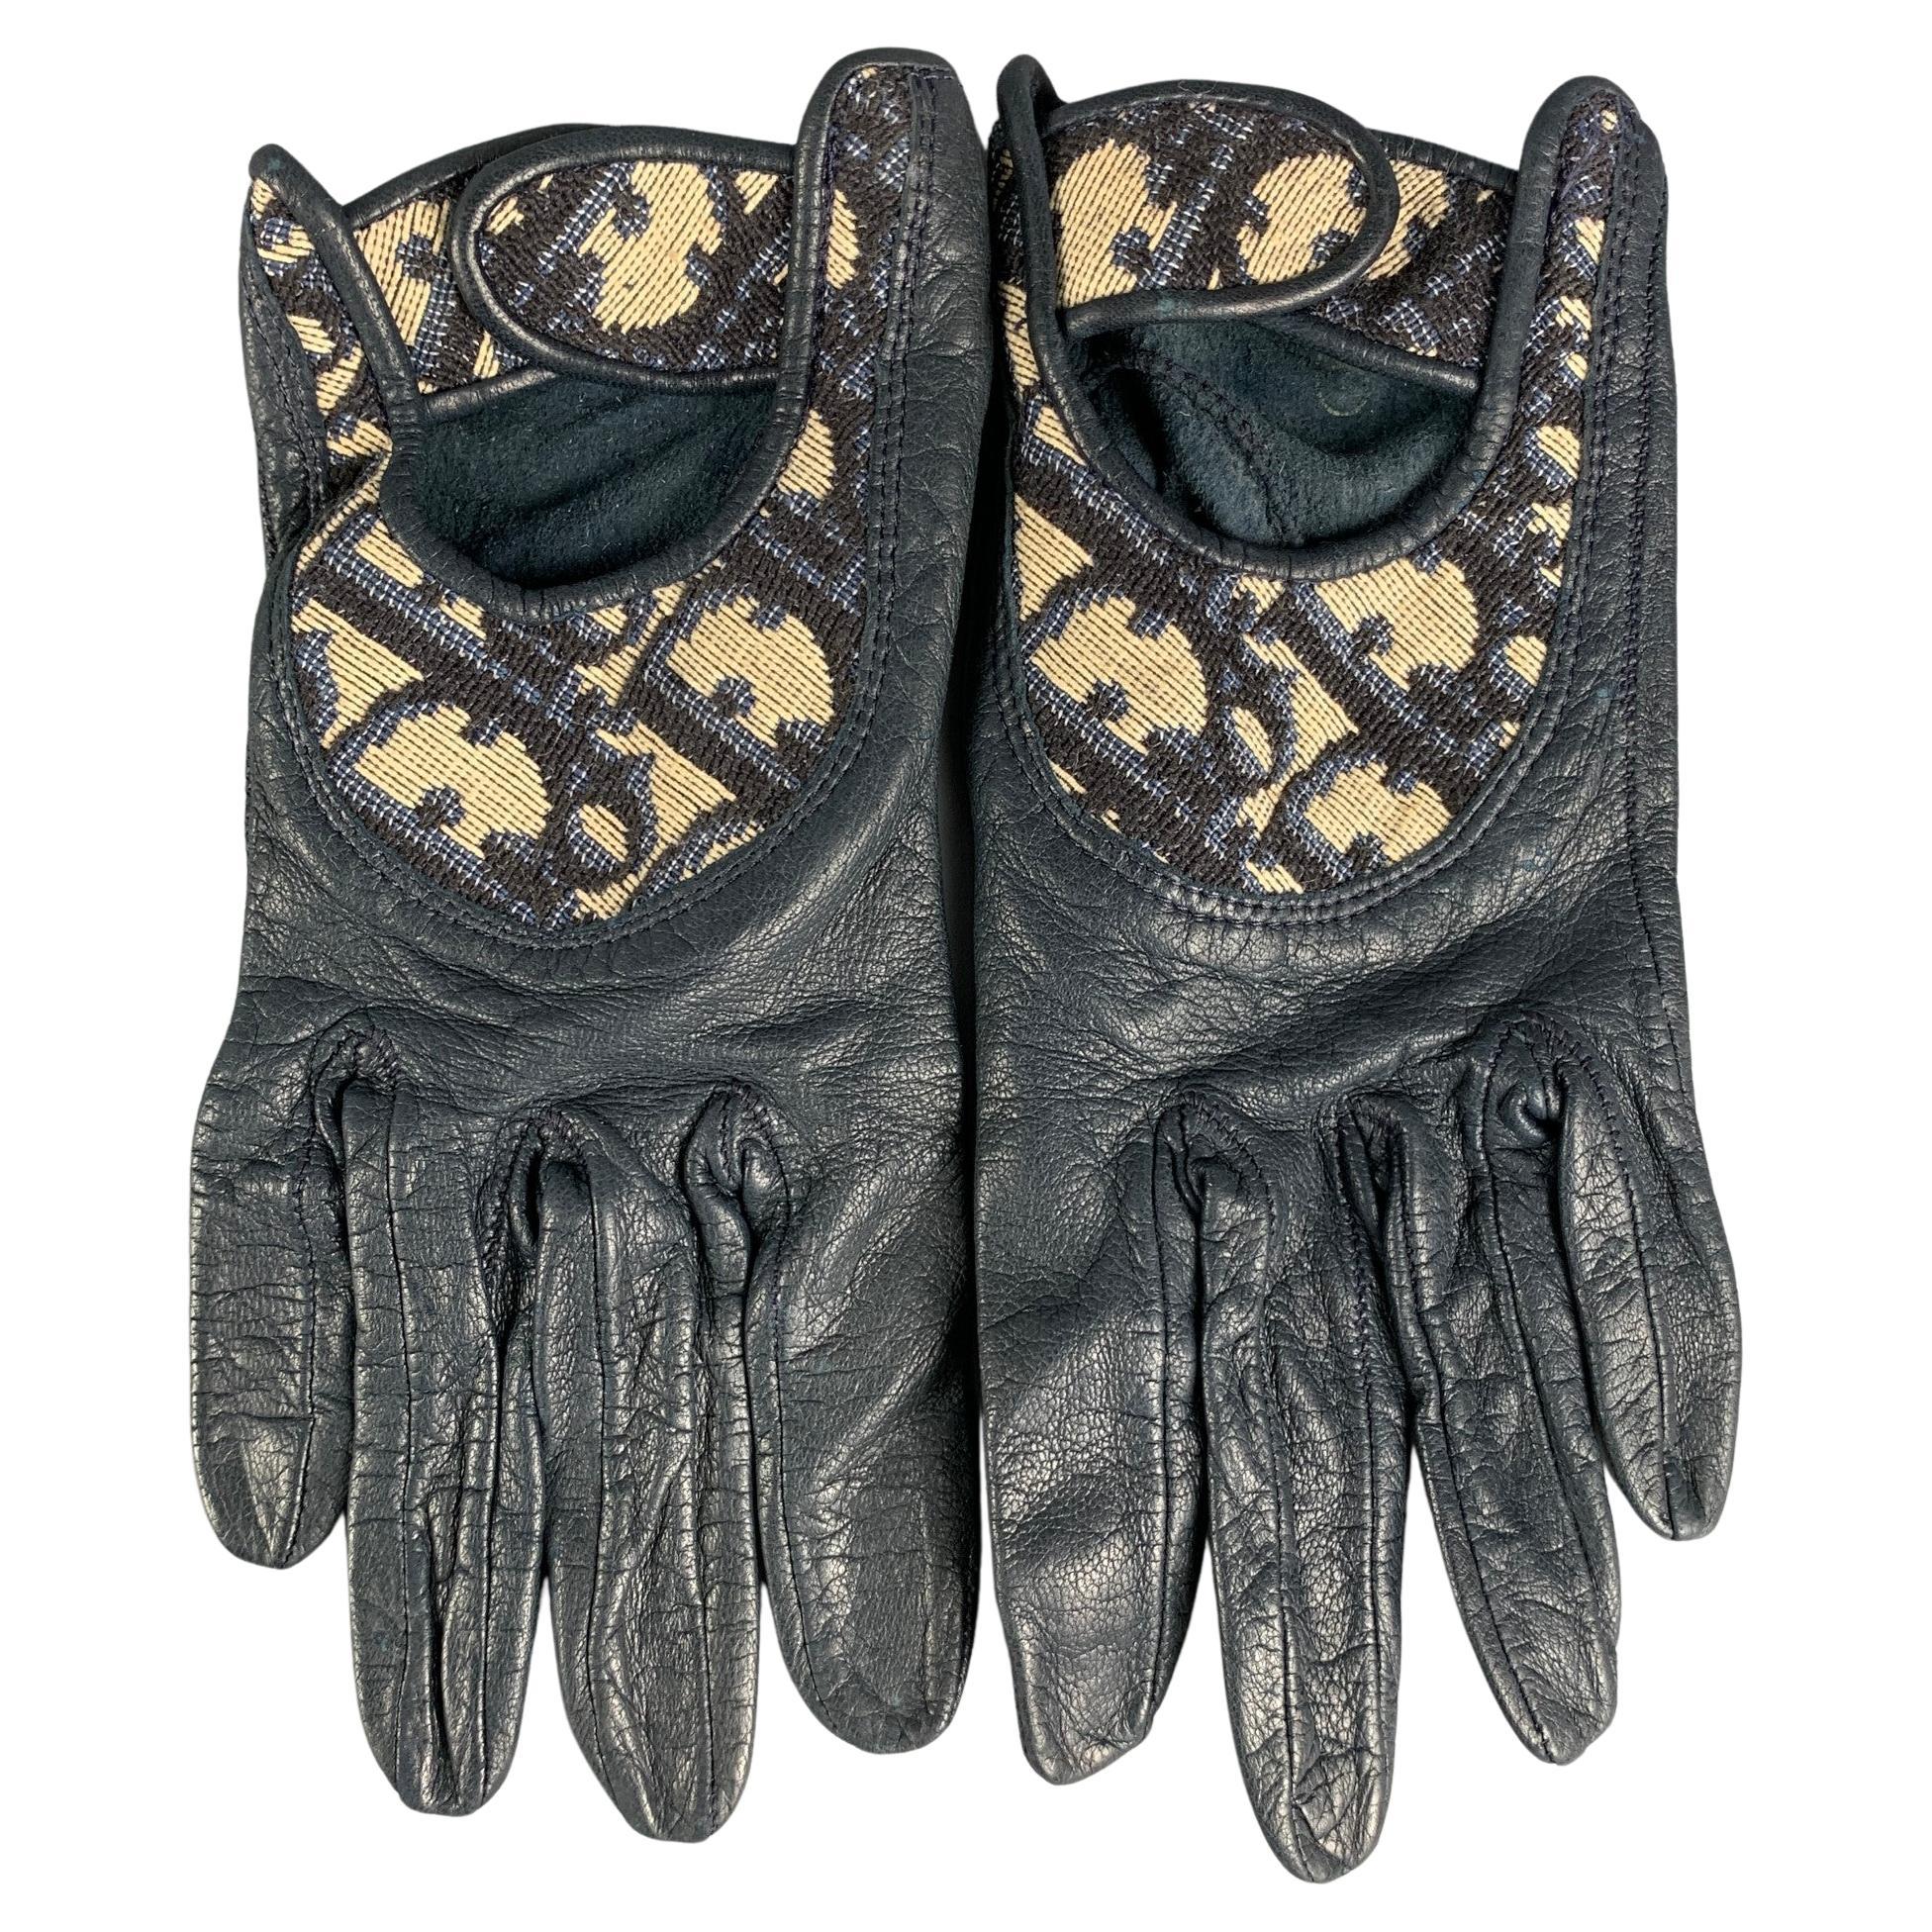 NWT Deadstock 30's Leather Gloves sz 7